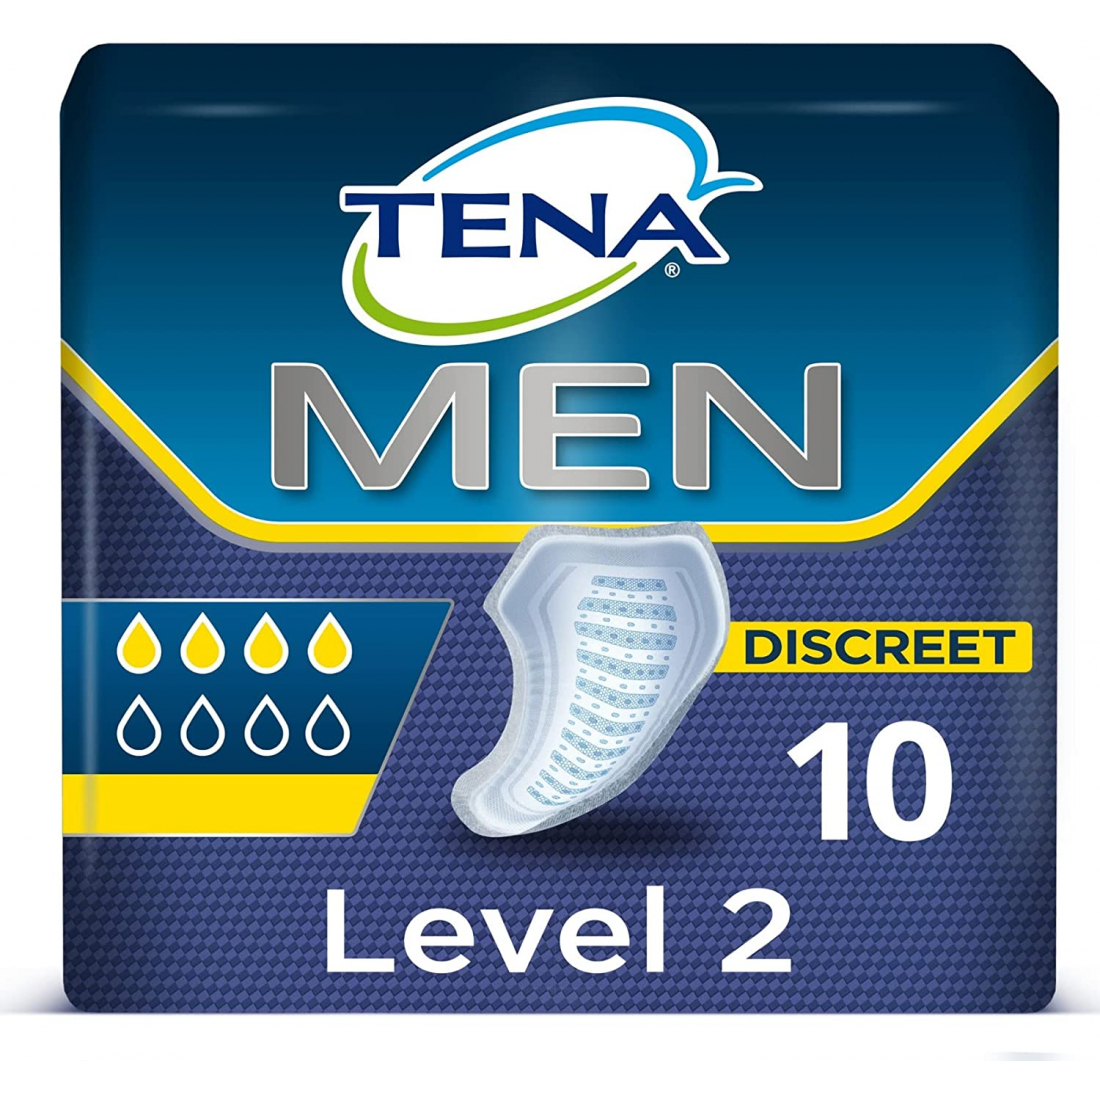 'Level 2' Incontinence Pads - 10 Pieces